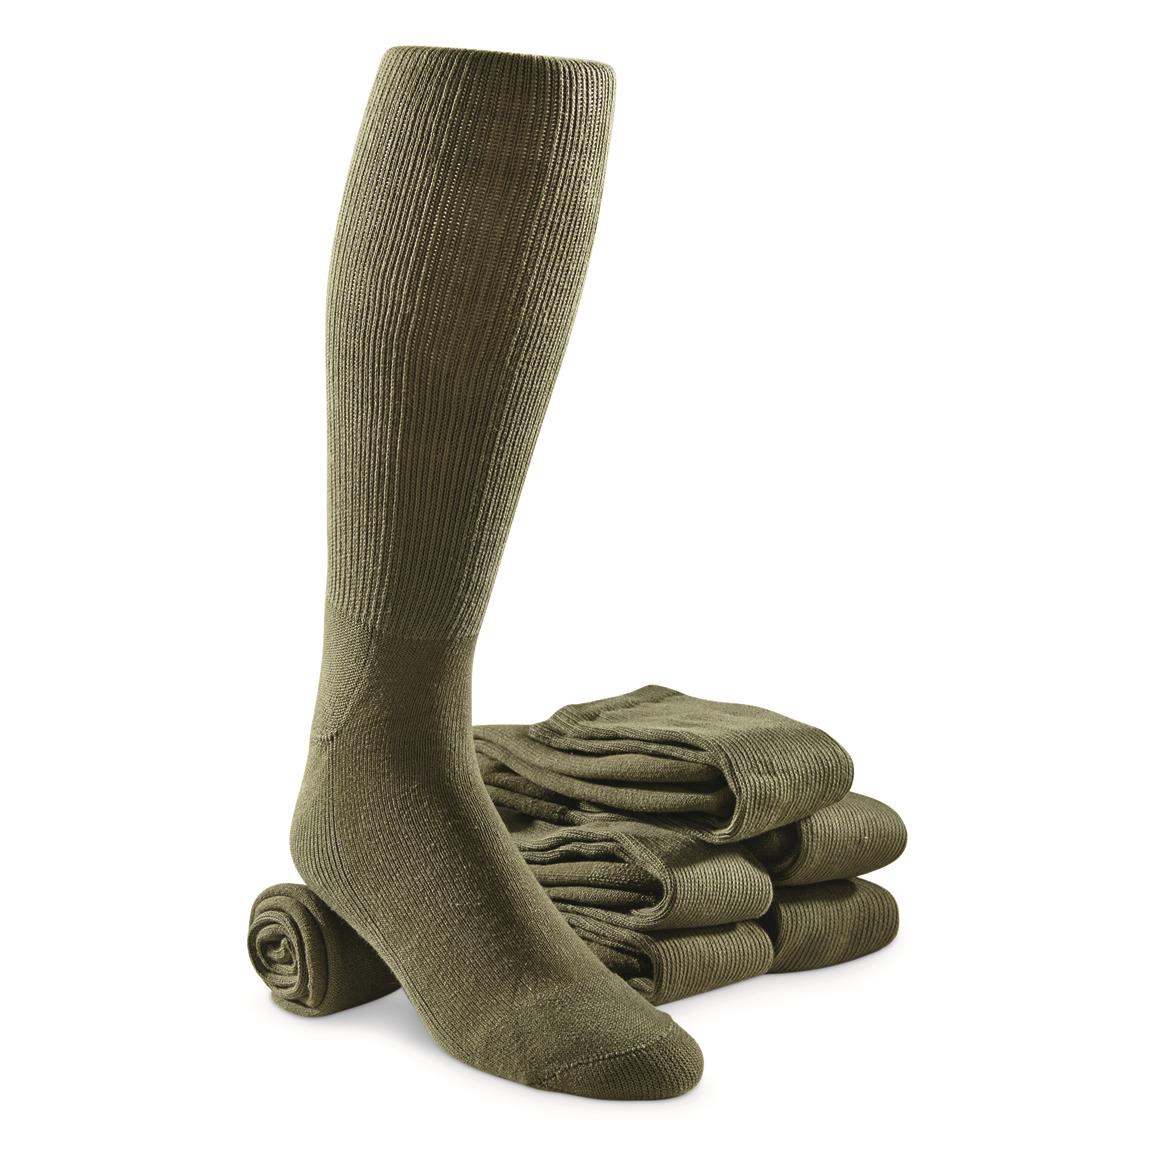 Best Army Boot Socks - Army Military